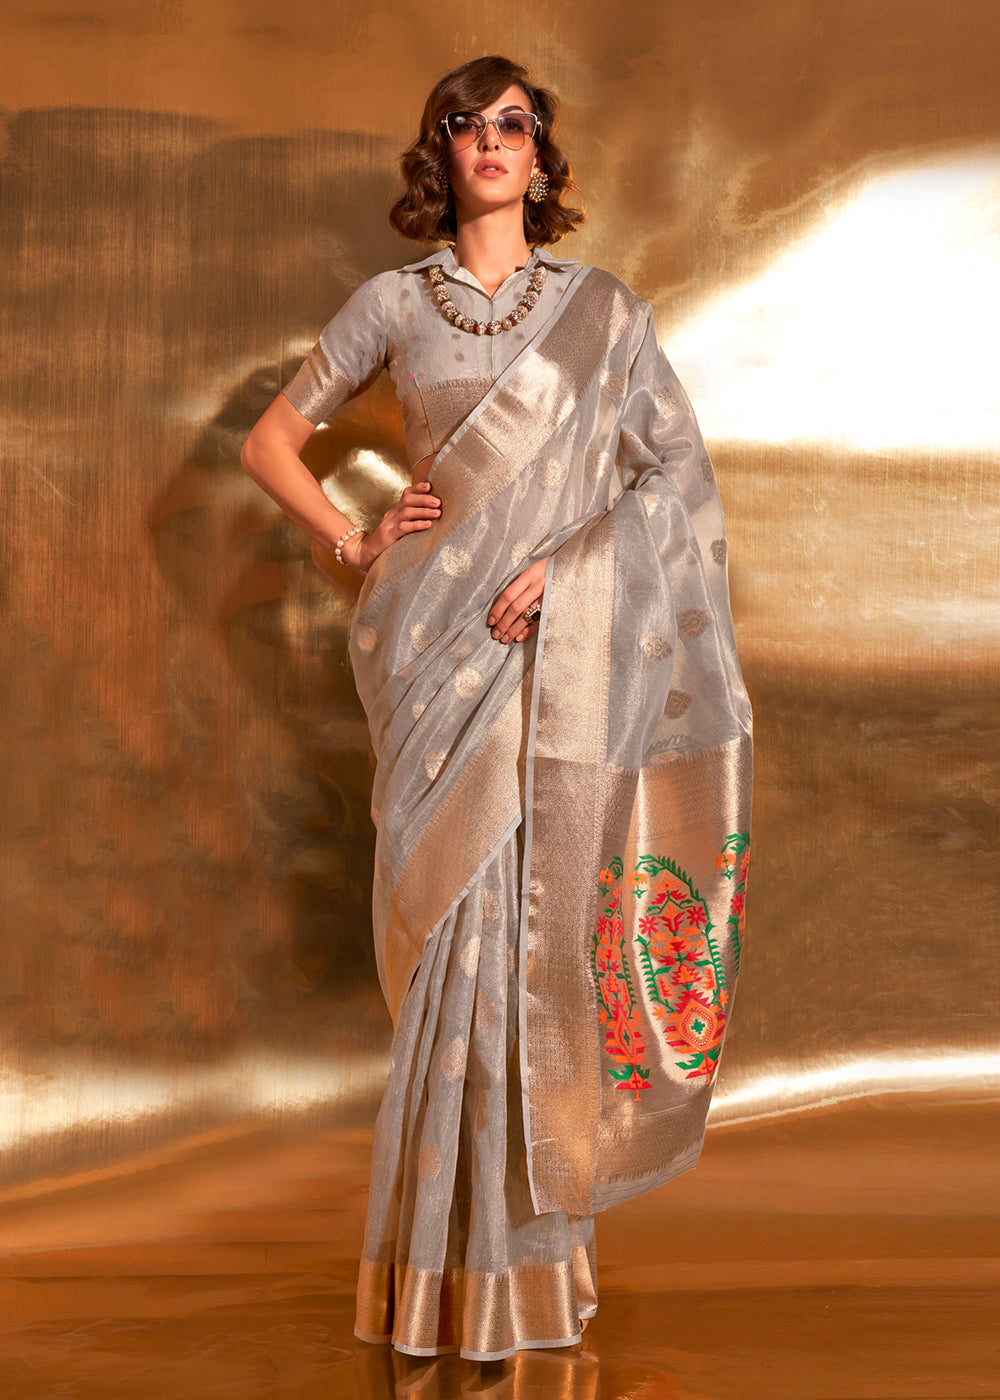 Party Wear Saree - Buy Latest Party Wear Sarees Online at